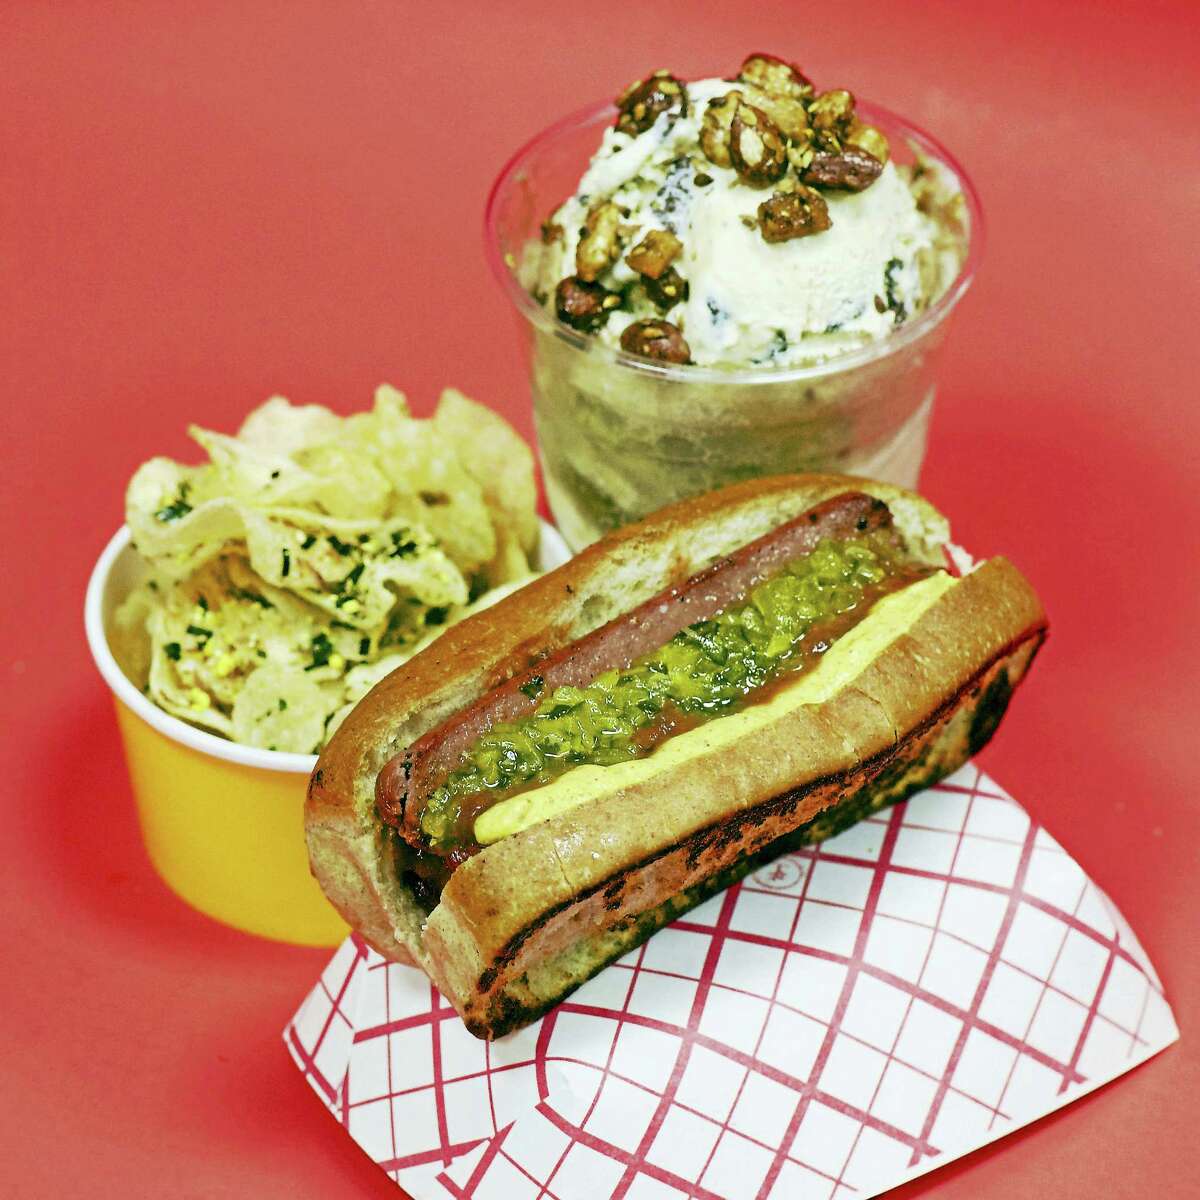 A grilled dog with hot pepper relish and spicy brown mustard (inspired by Blackie’s of Cheshire); kettle chips with furikake and vinegar; and a float with Foxon Park root beer, Ashley’s ice cream, and almond brittle.